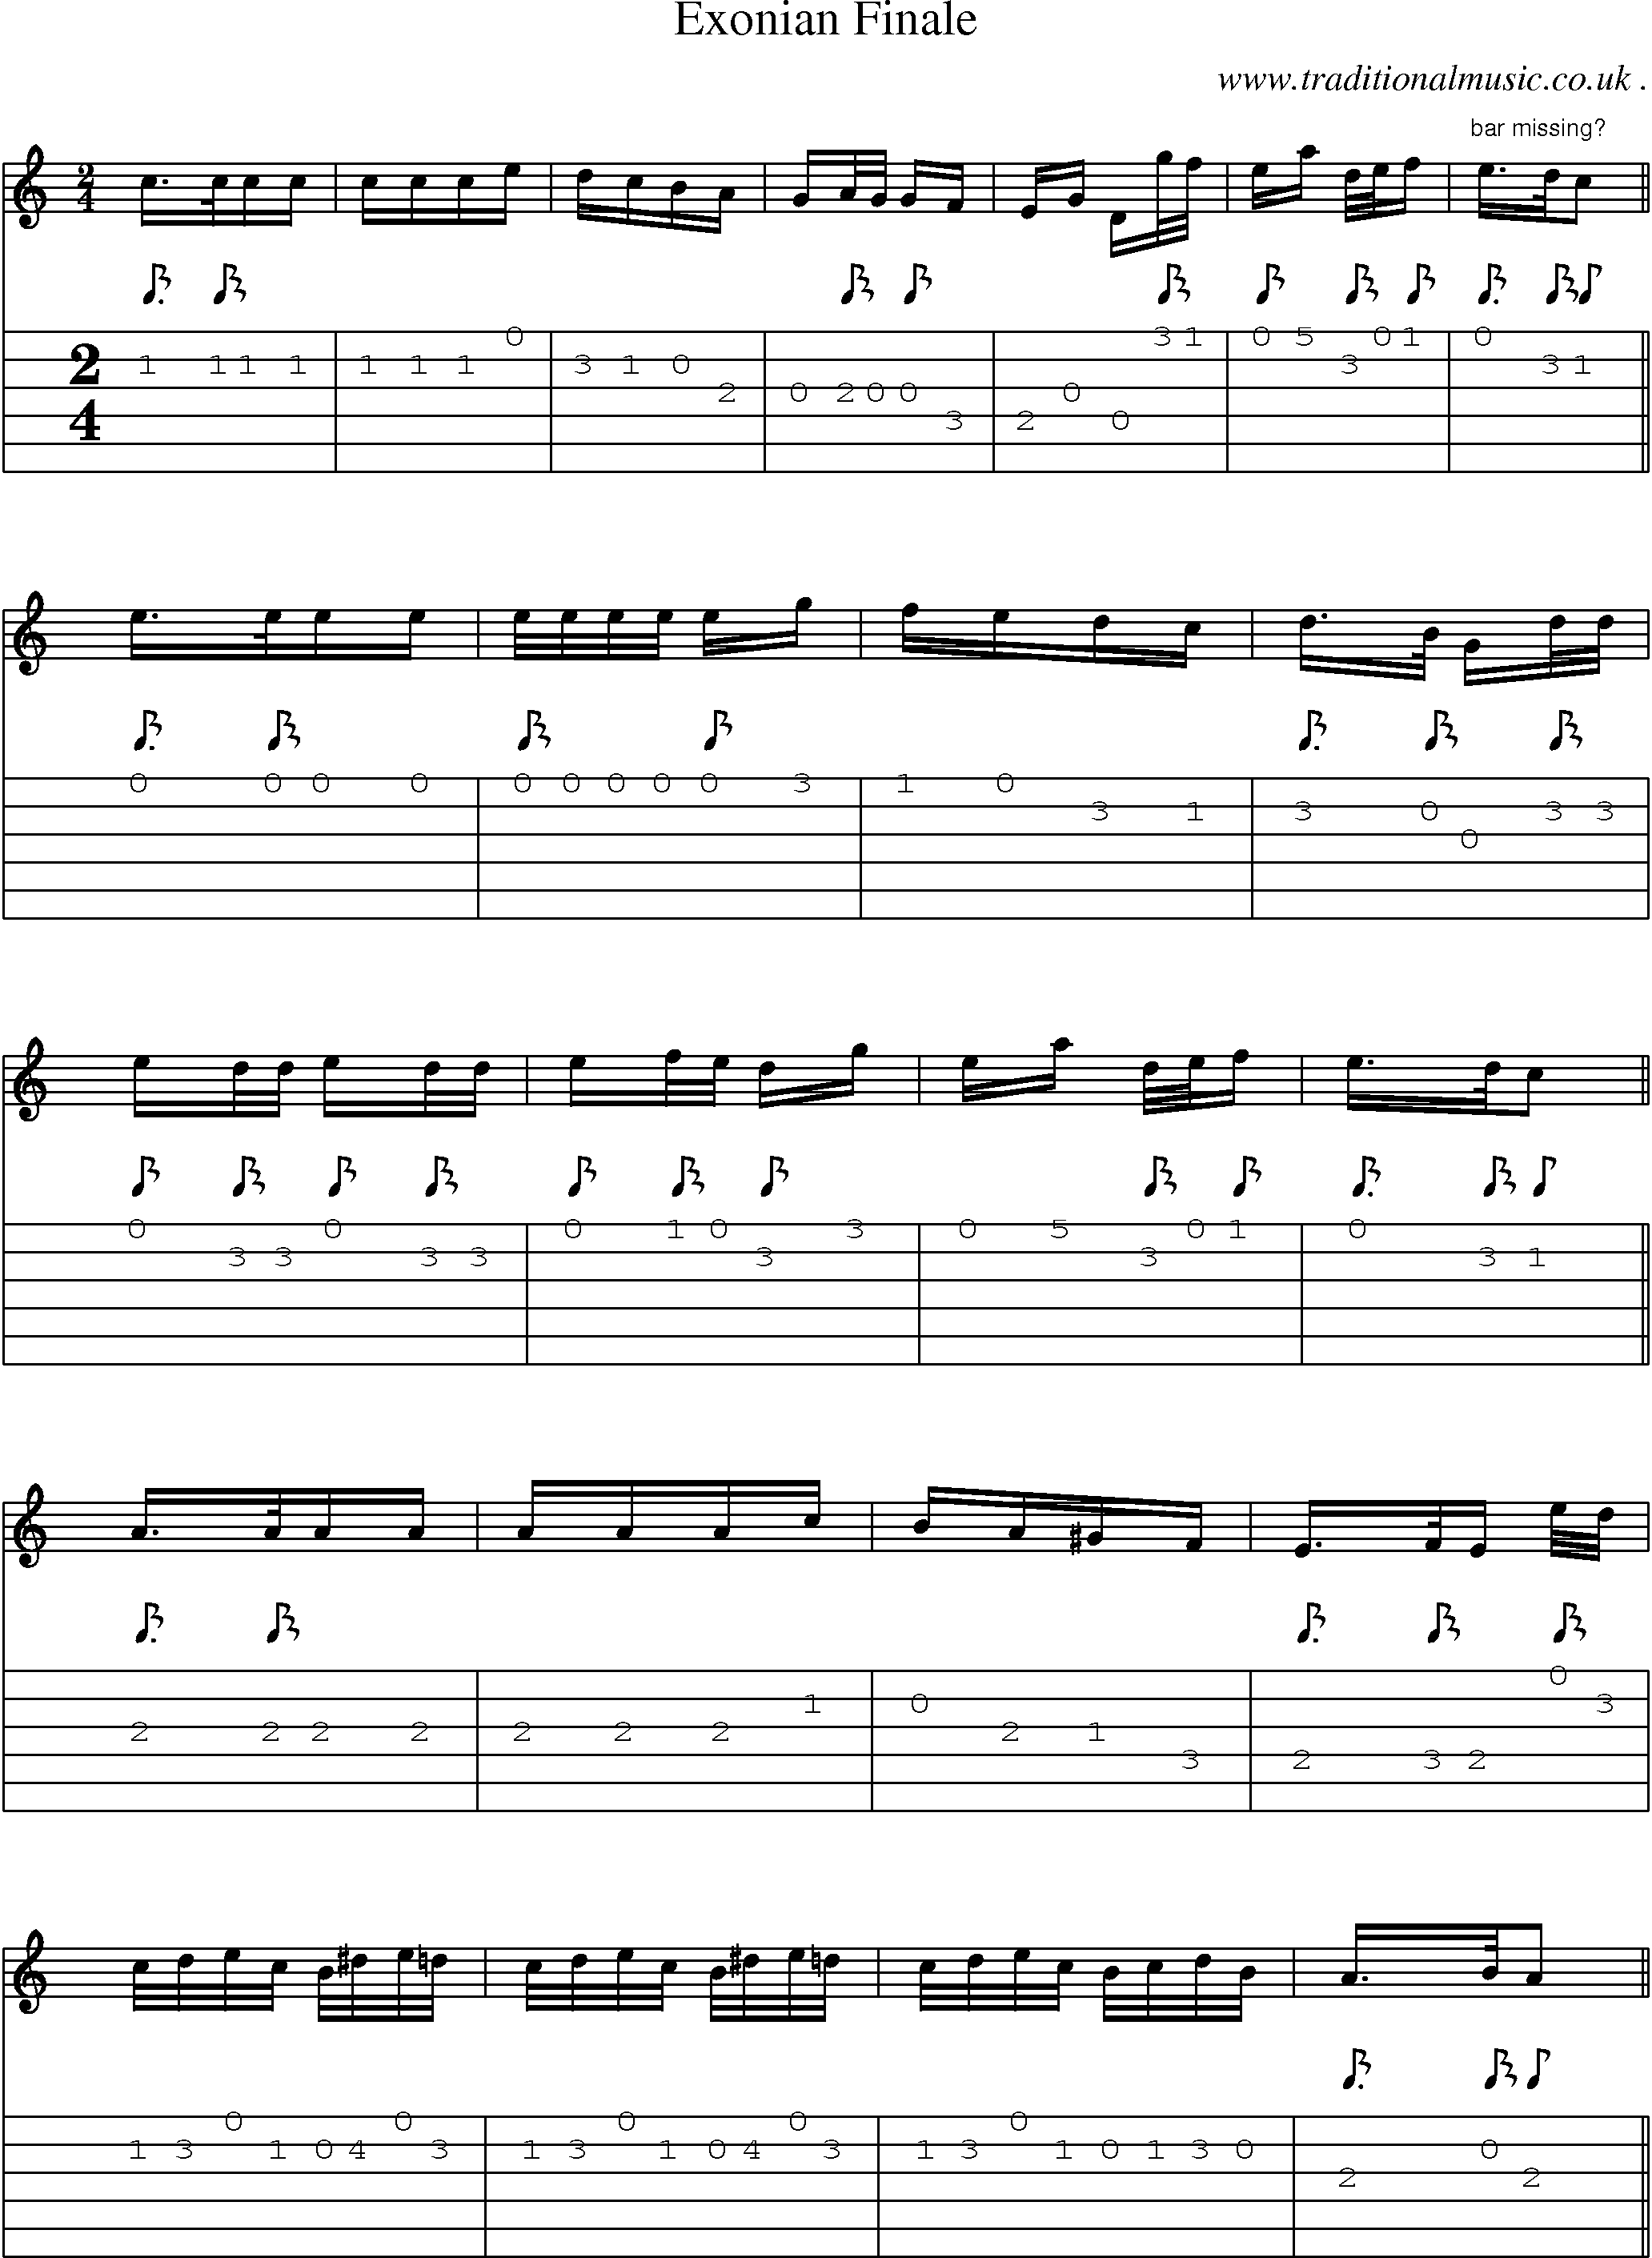 Sheet-Music and Guitar Tabs for Exonian Finale